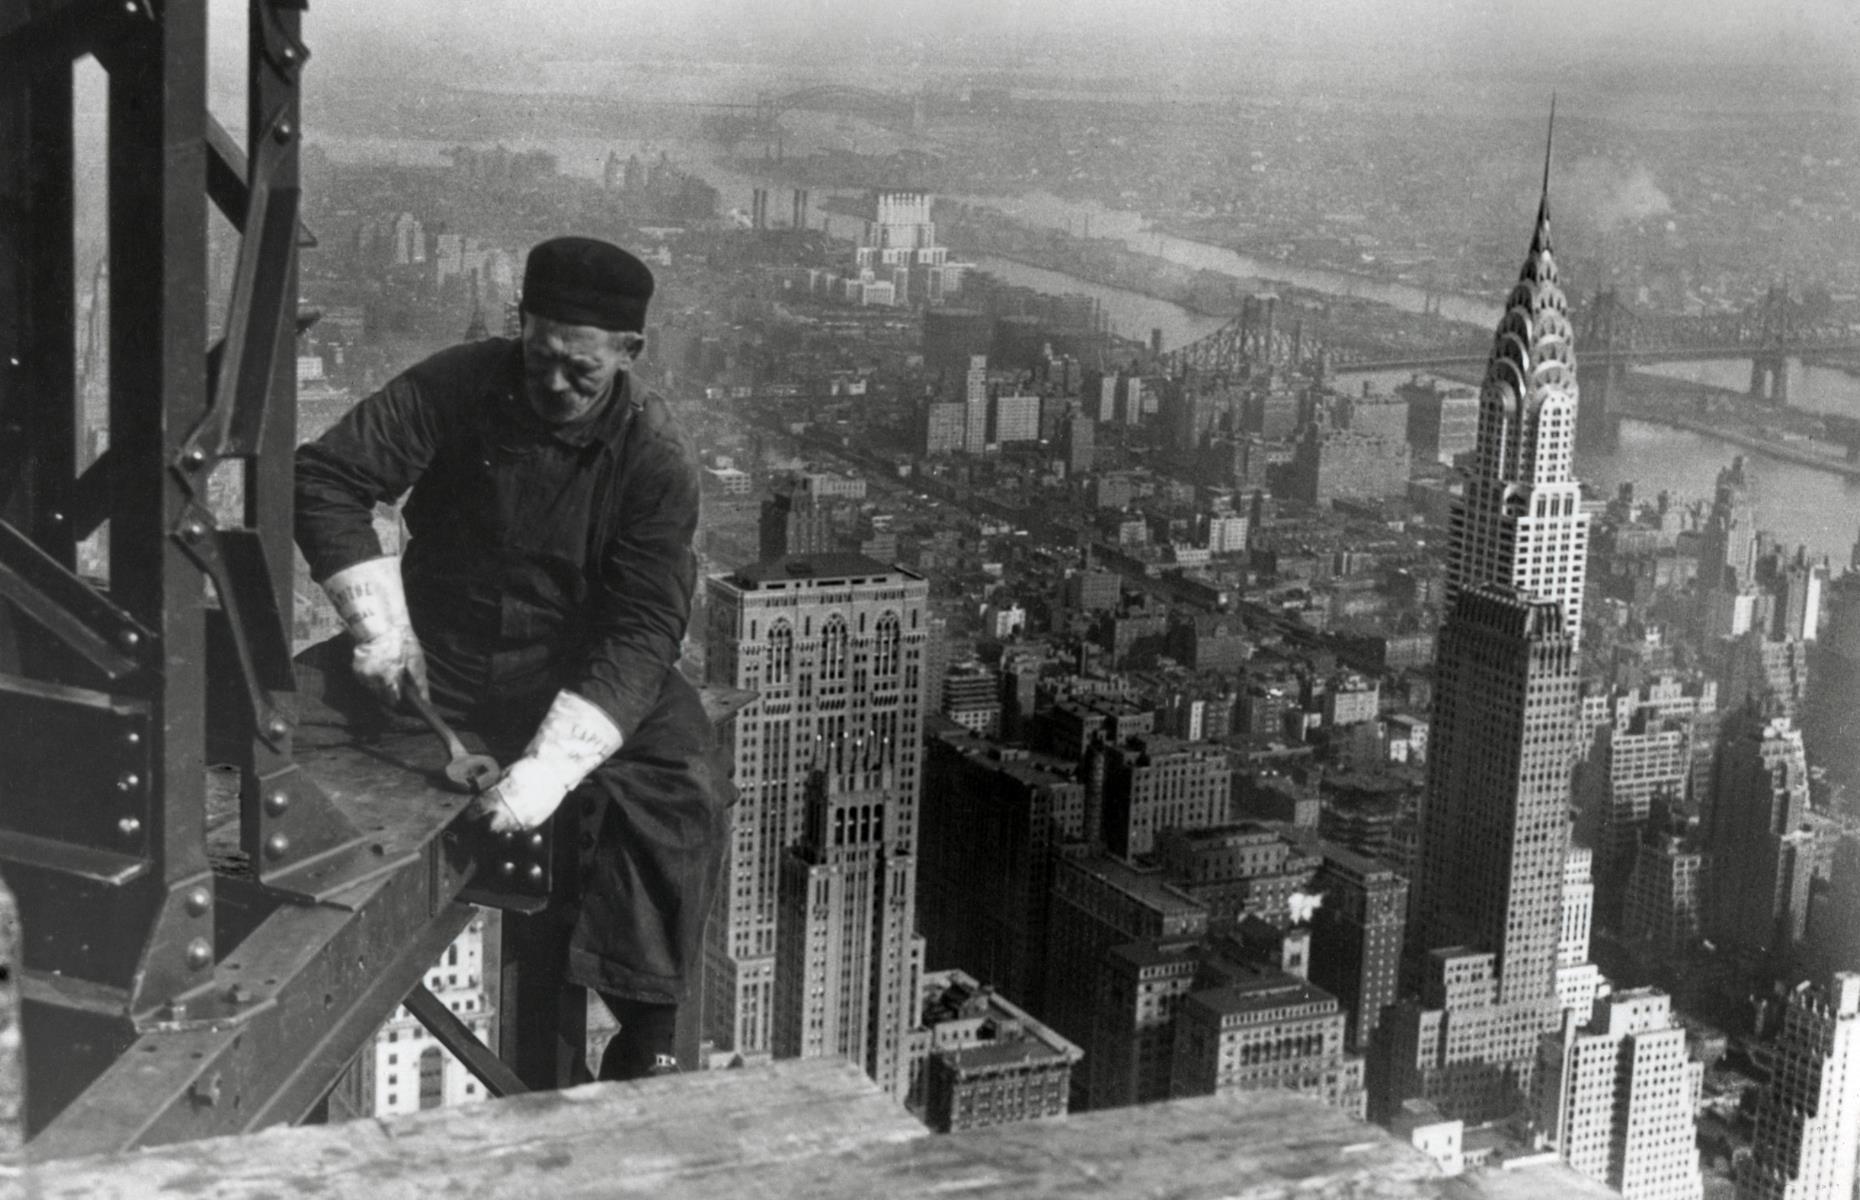 <p>Pictured here under construction in 1931, New York’s Empire State Building took just one year and 45 days to build. It was the tallest building in <a href="http://www.skyscrapercenter.com/building/empire-state-building/261">the world</a> until the 1970s, when it was replaced by the World Trade Center. Today, more than four million visitors usually take the trip up to the Empire State Building’s 86th and 102nd floor observatories each year, to gaze at the city’s views from up high. </p>